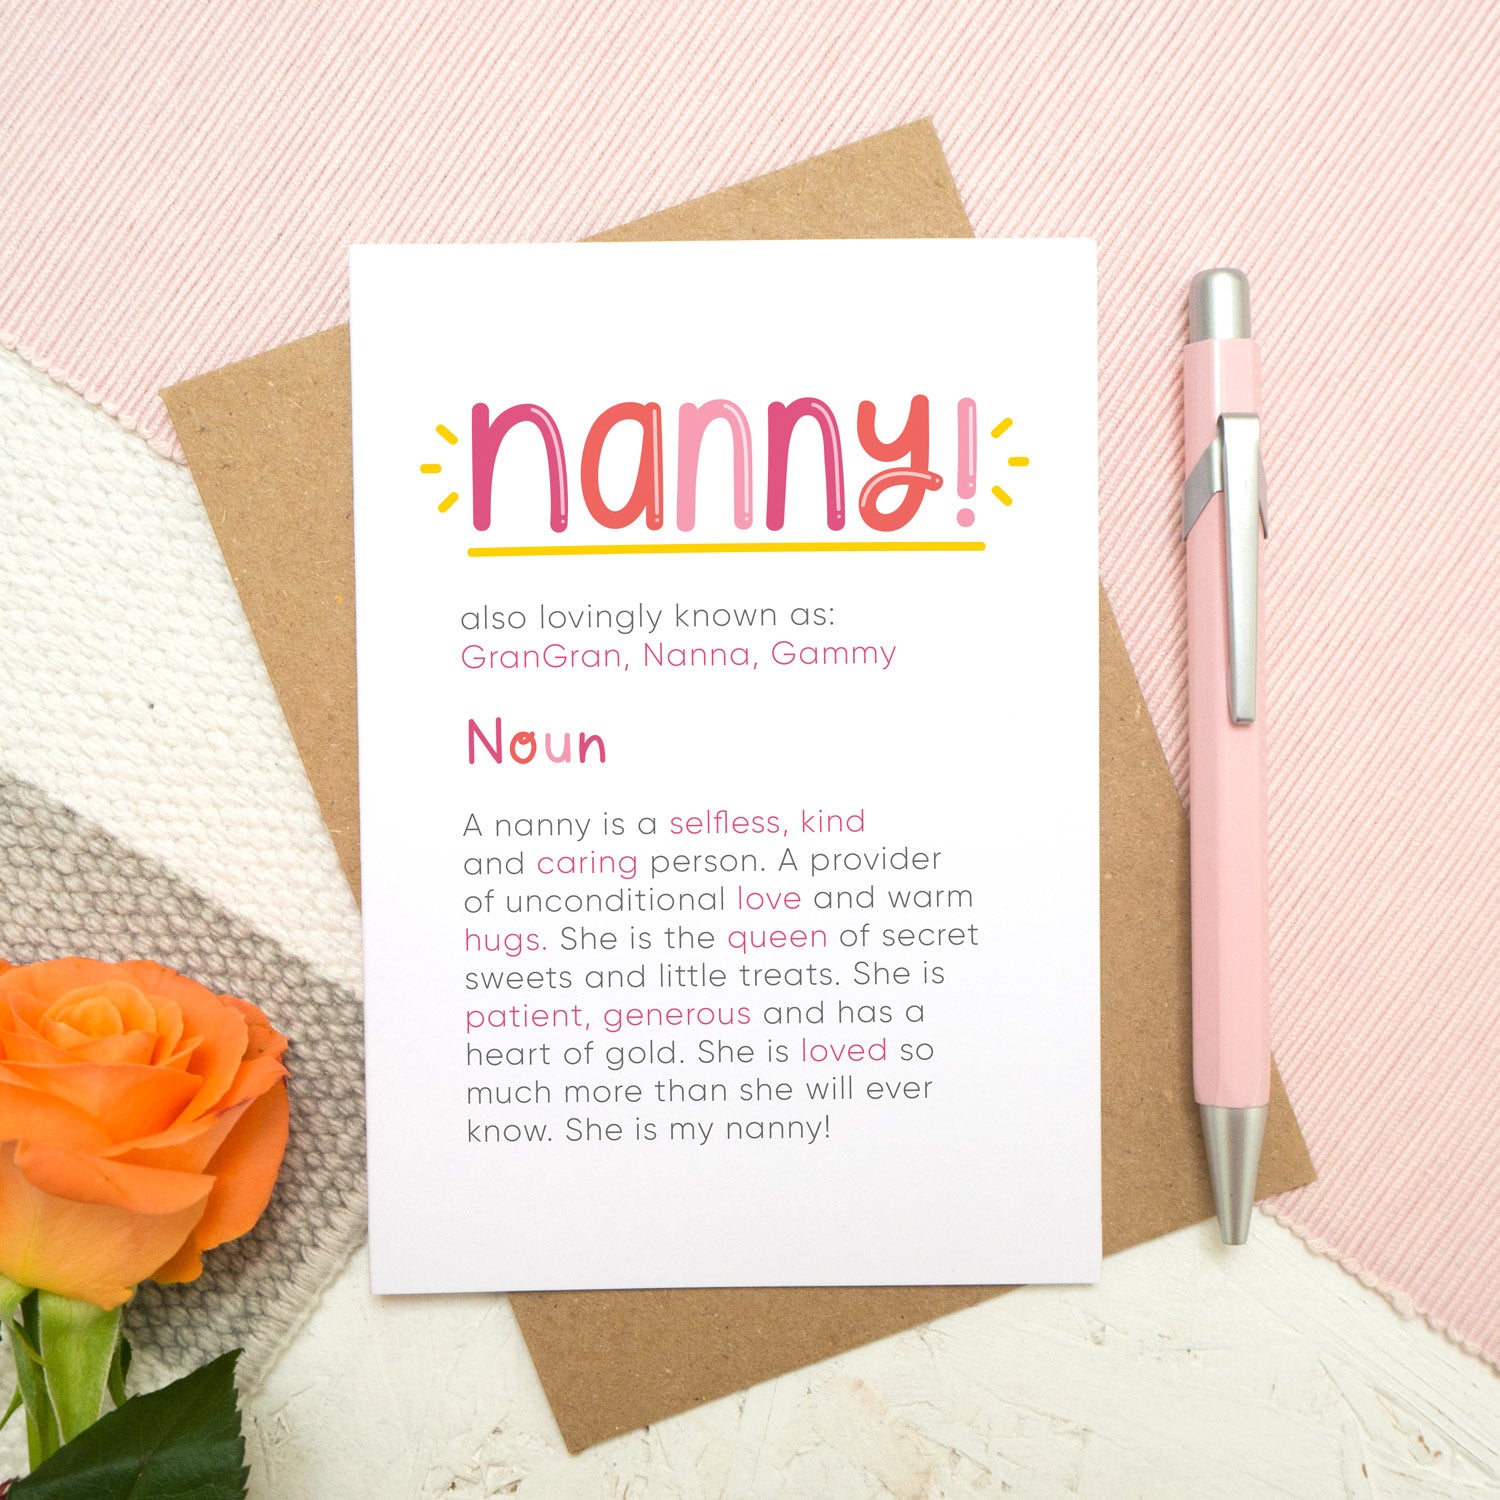 A personalised Nanny dictionary definition card lying flat on top of a kraft brown envelope on top of a pink runner and a grey and white striped rug. There is an orange rose in the bottom left corner and a pen for scale on the right. The card features hand drawn writing in varying tones of pink and a definition of what a nanny is with key words highlighted in pink.